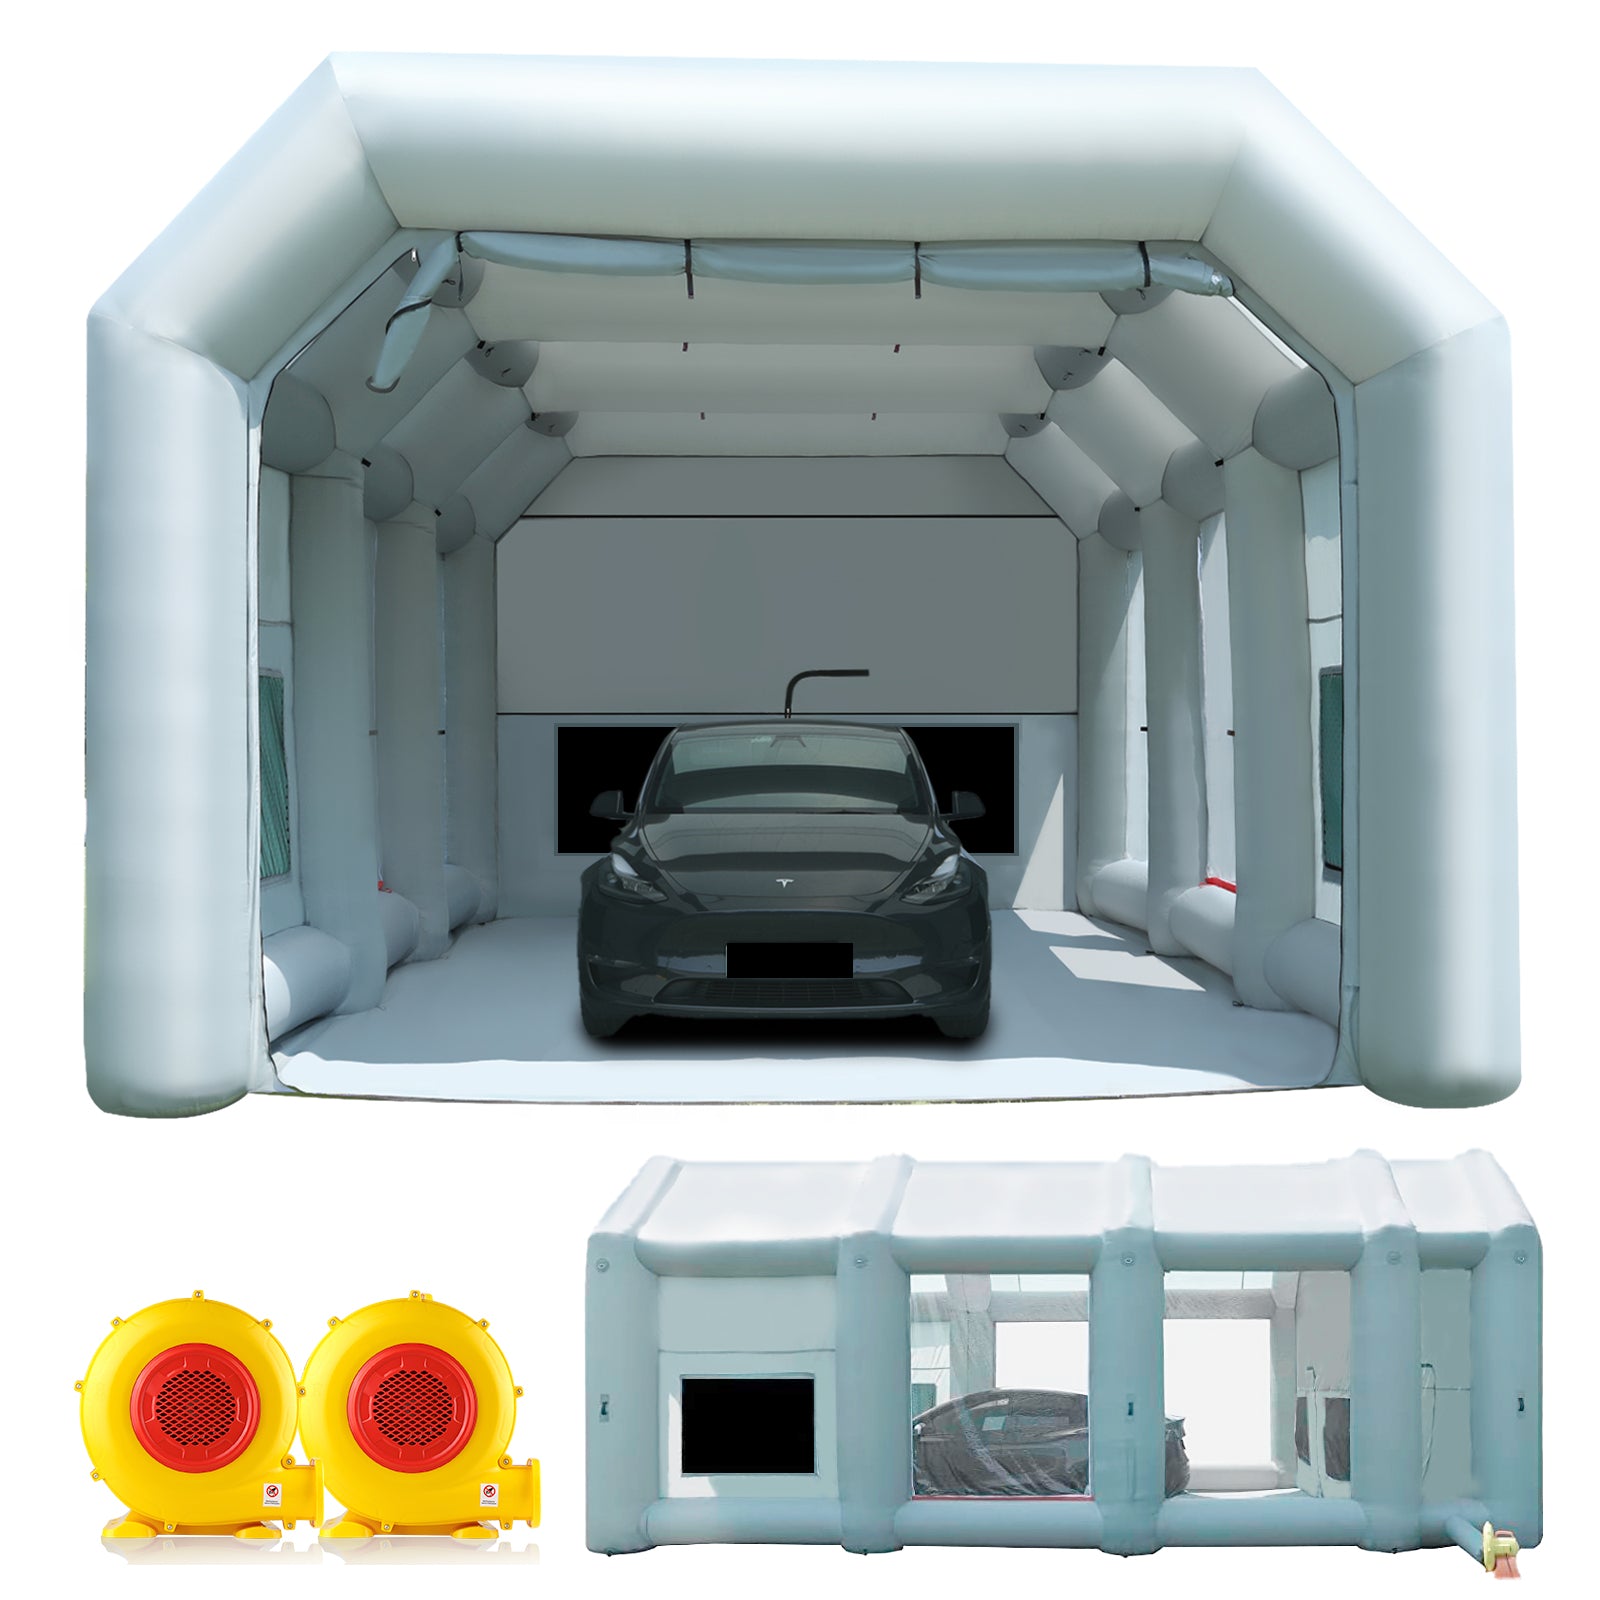 Sewinfla High Quality Portable Spray Paint Tent Spray Inflatable Paint Booth  Car Painting Booth Tent - AliExpress